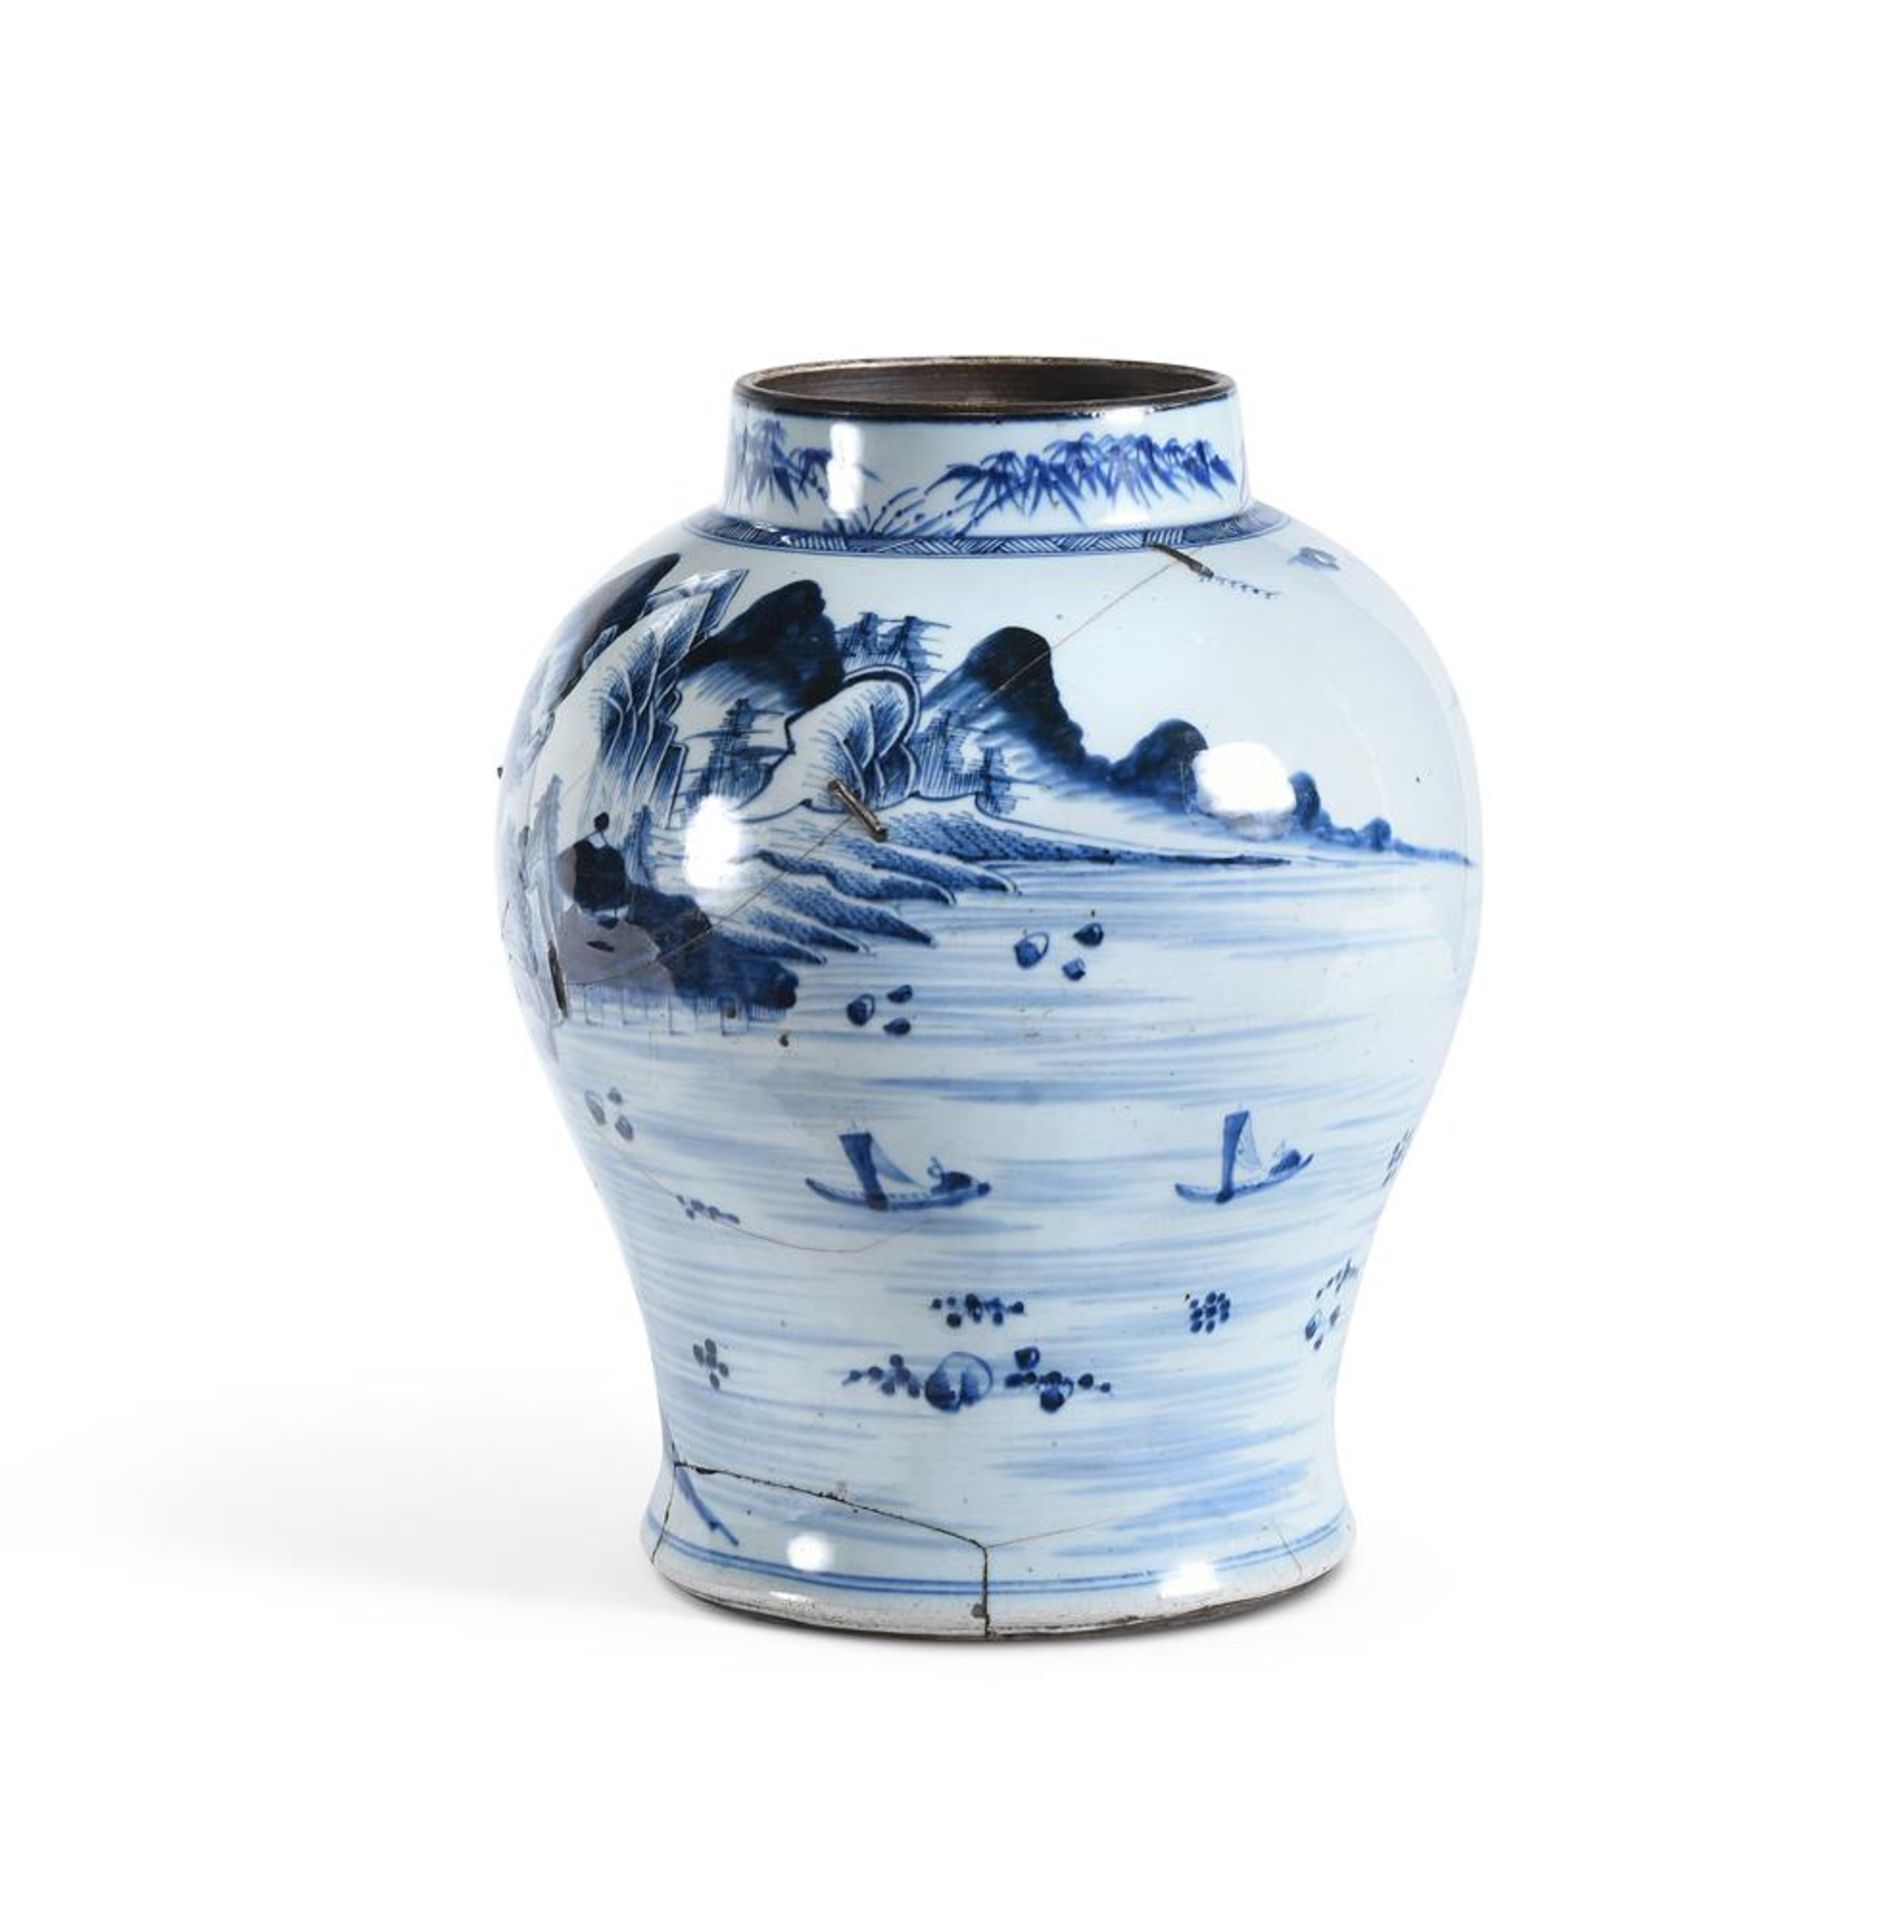 A BLUE AND WHITE PORCELAIN VASE, CHINESE, 18TH CENTURY - Image 2 of 2